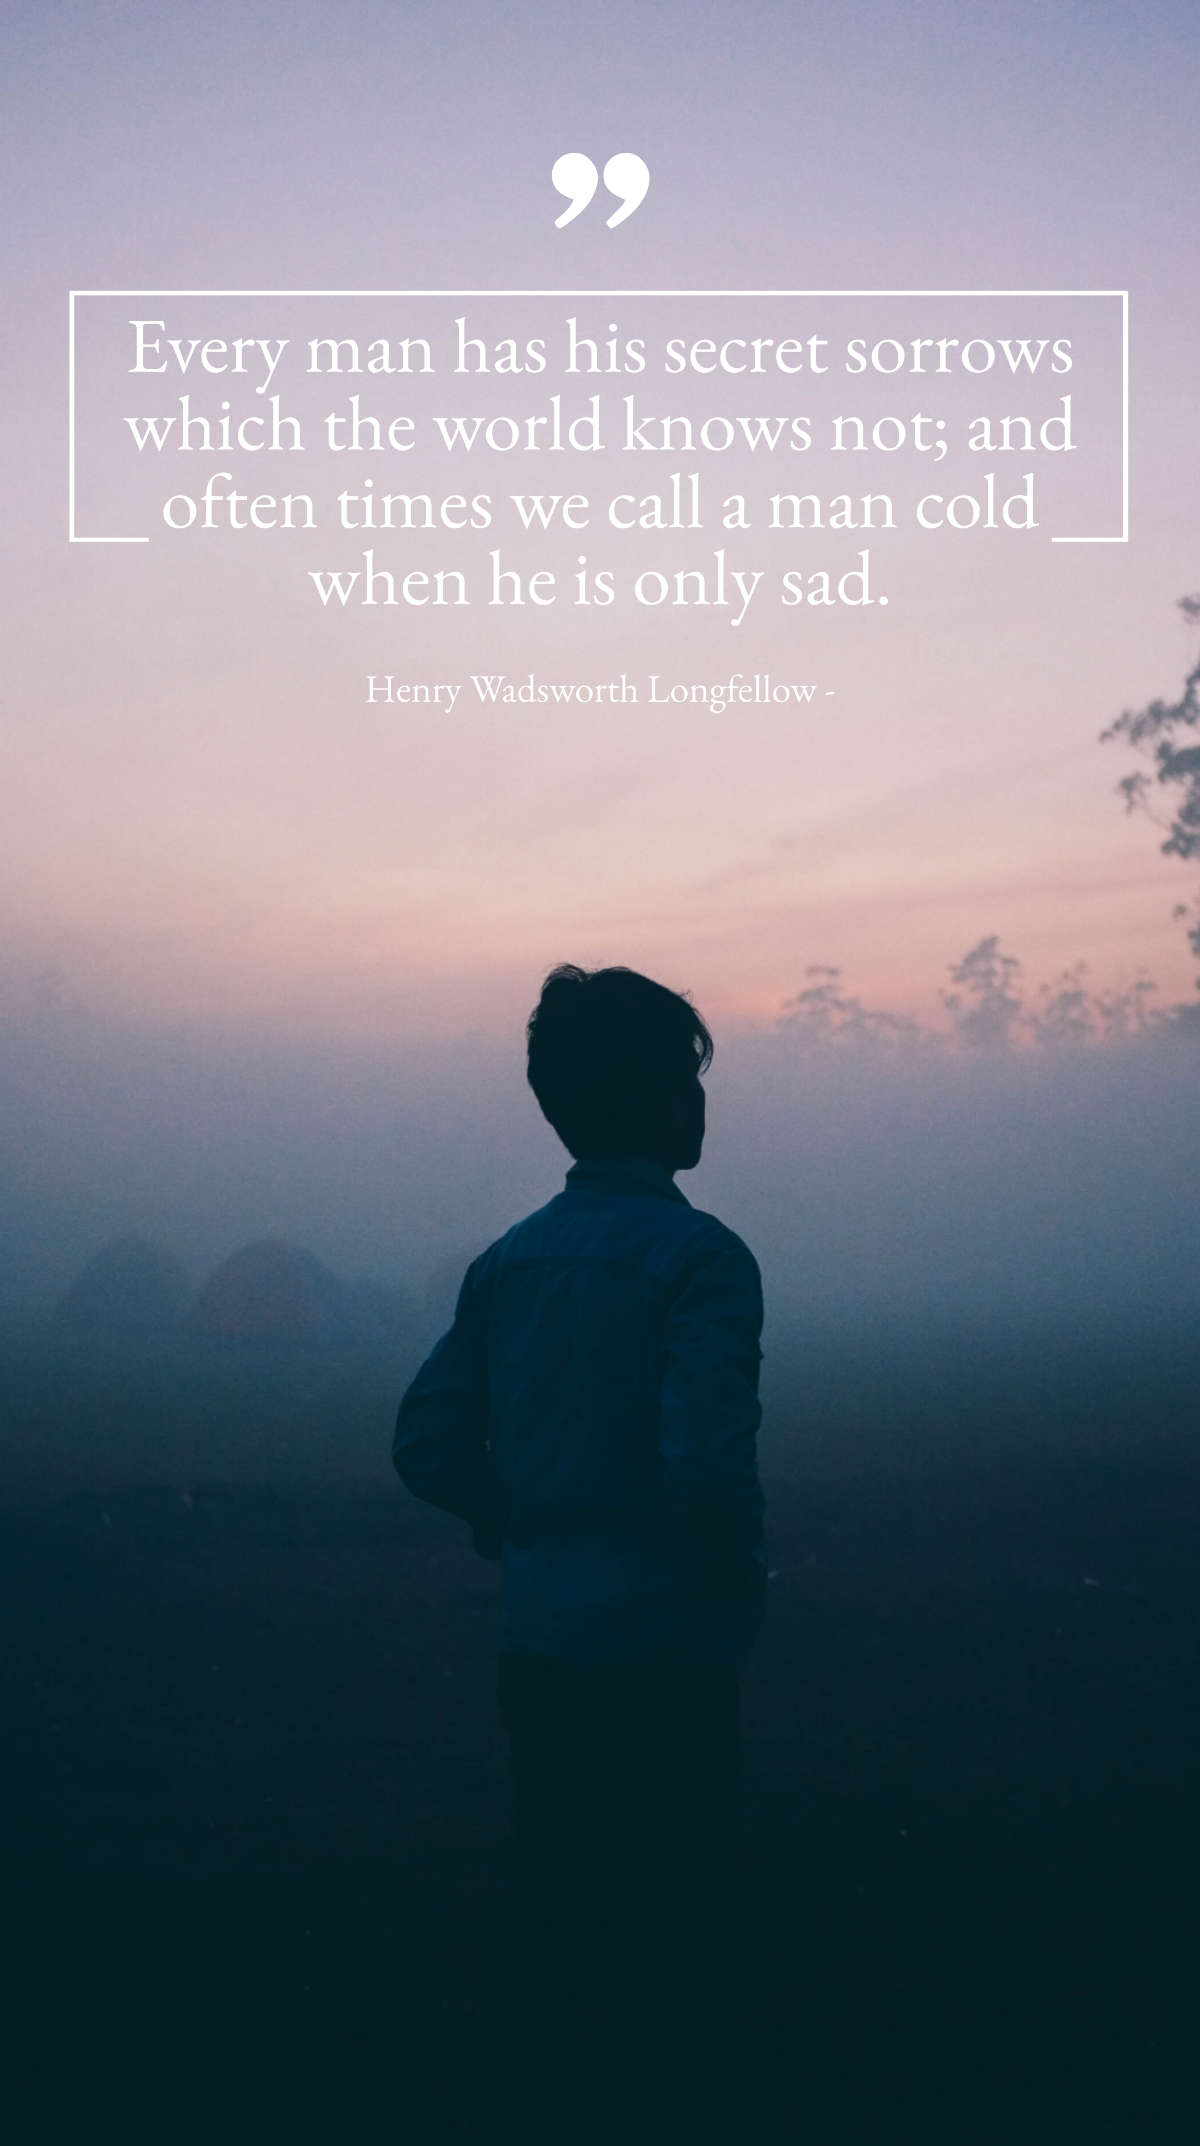 Henry Wadsworth Longfellow - Every man has his secret sorrows which the world knows not; and often times we call a man cold when he is only sad. Template